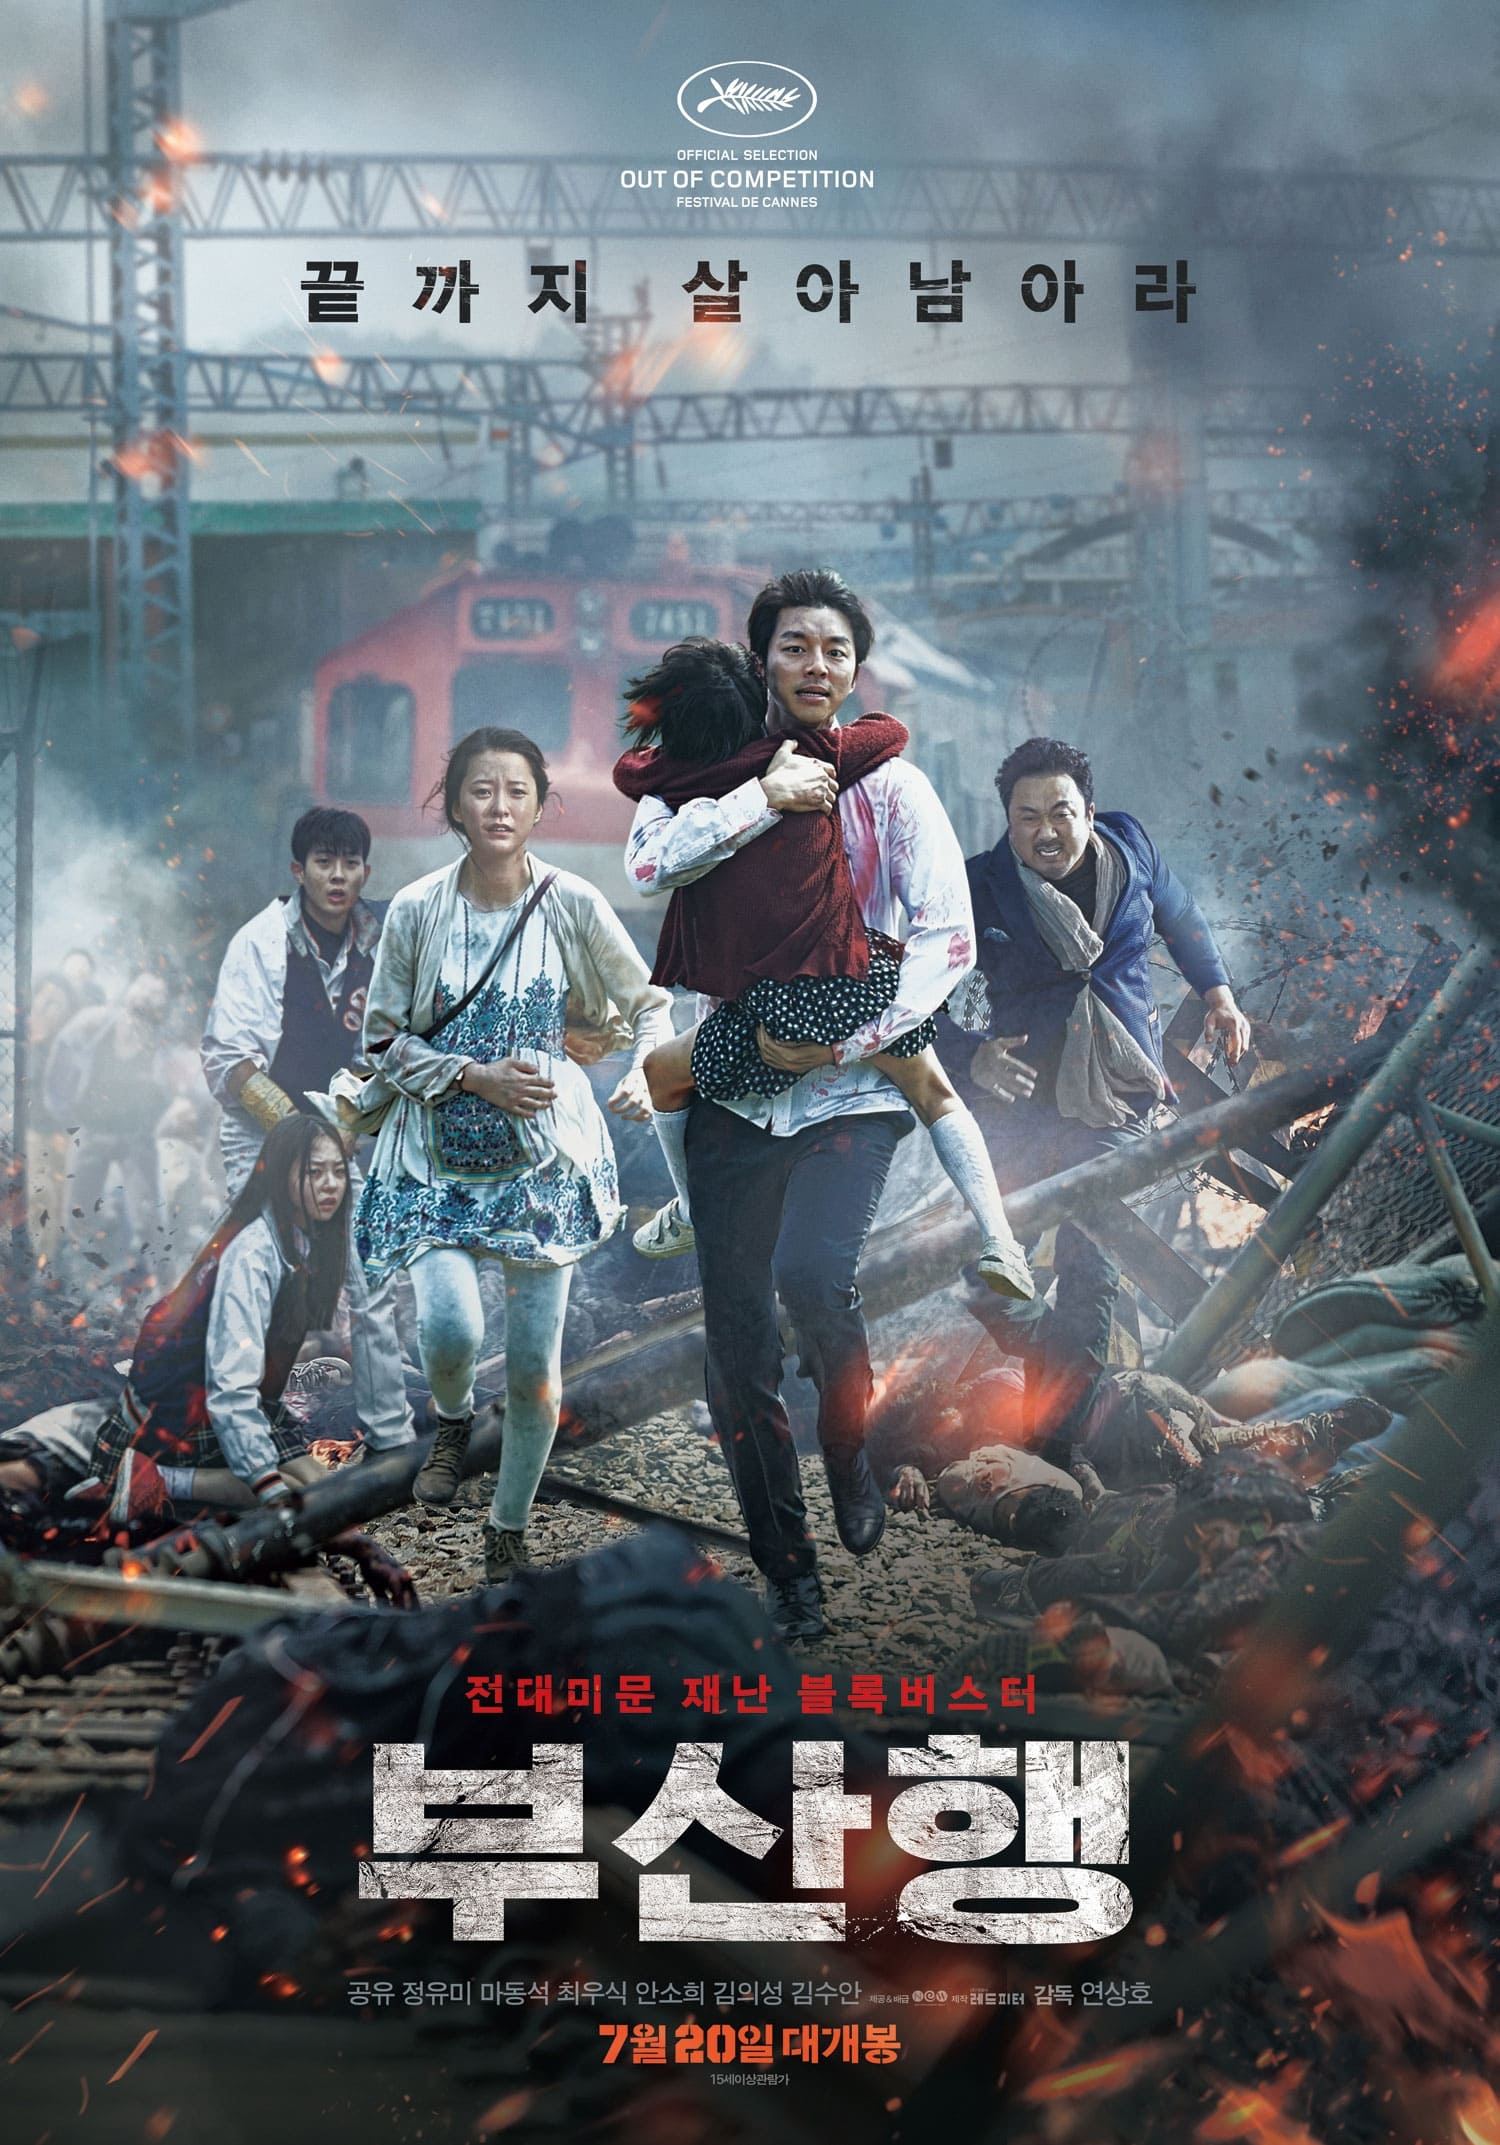 The poster of the Korean horror film Train to Busan